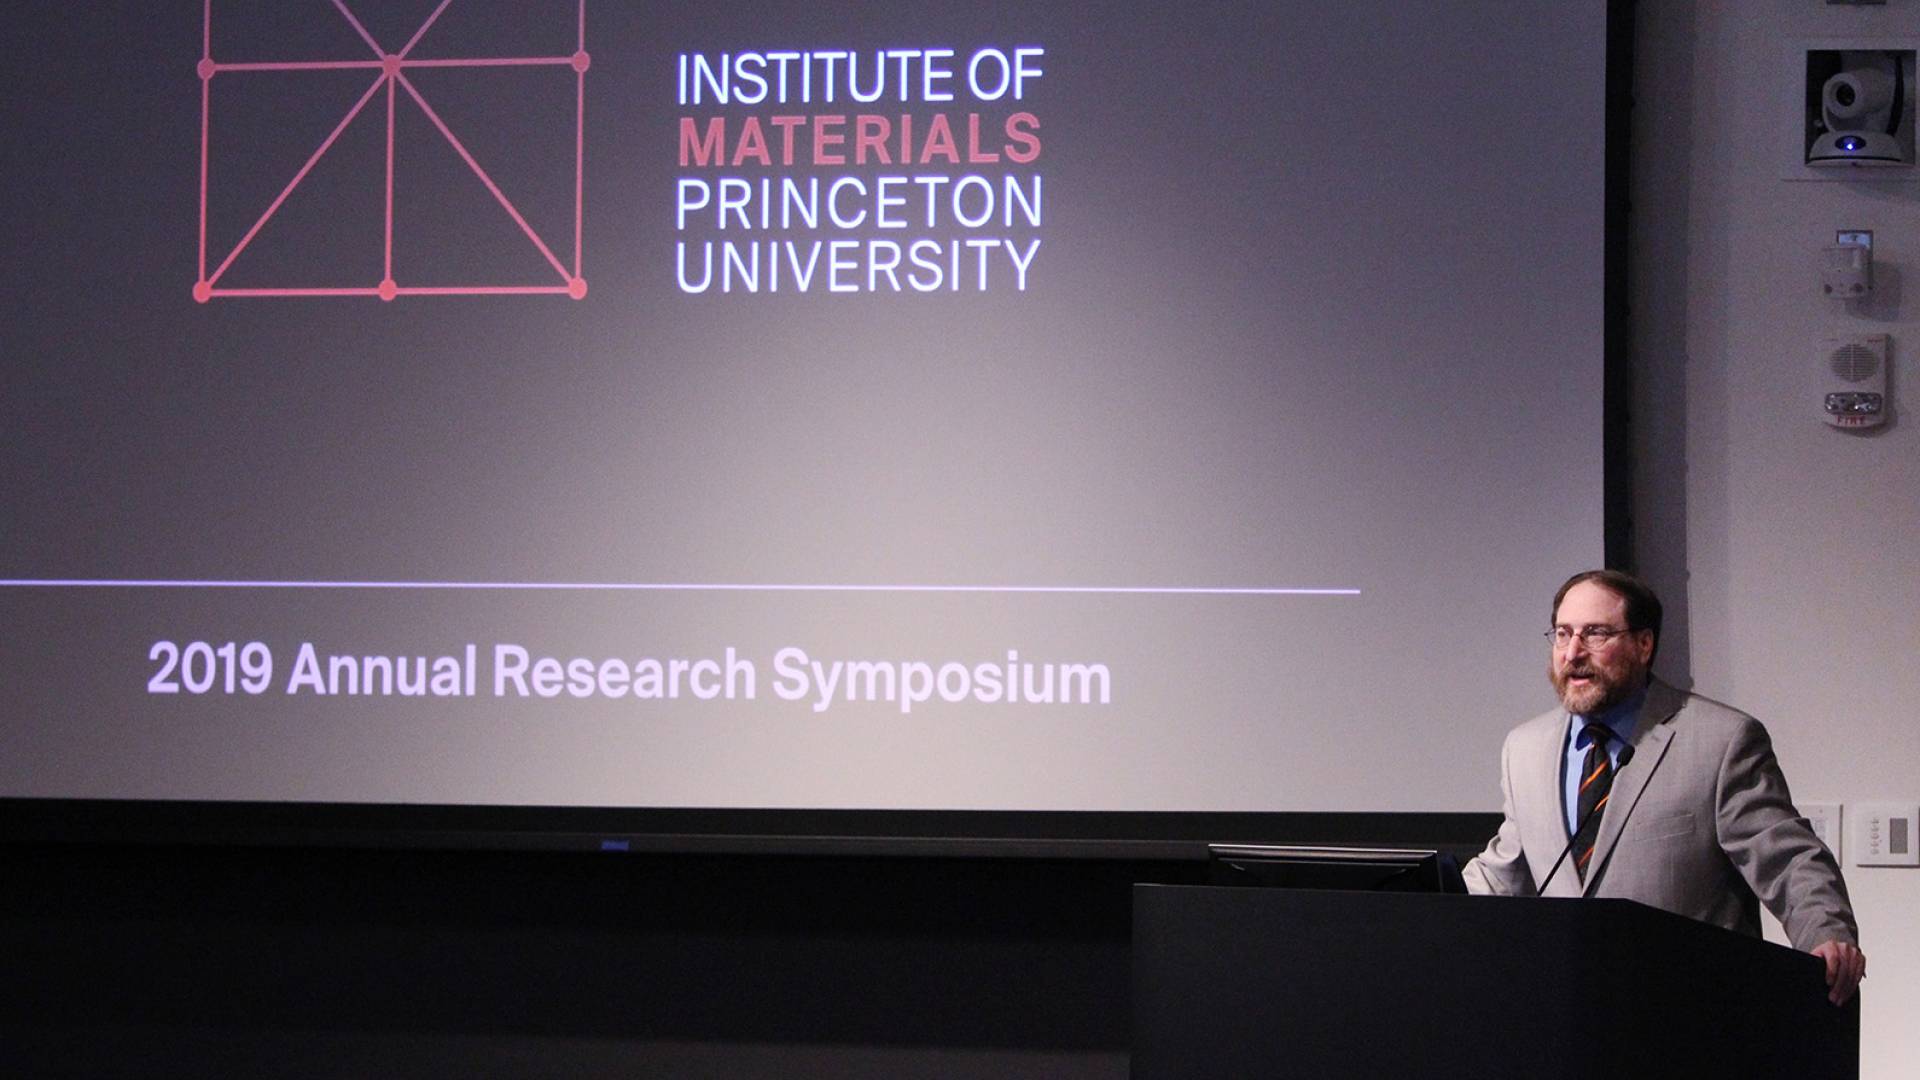 Craig Arnold standing at podium in front of screen with the words "Institute of Materials Princeton University 2019 Annual Research Symposium"